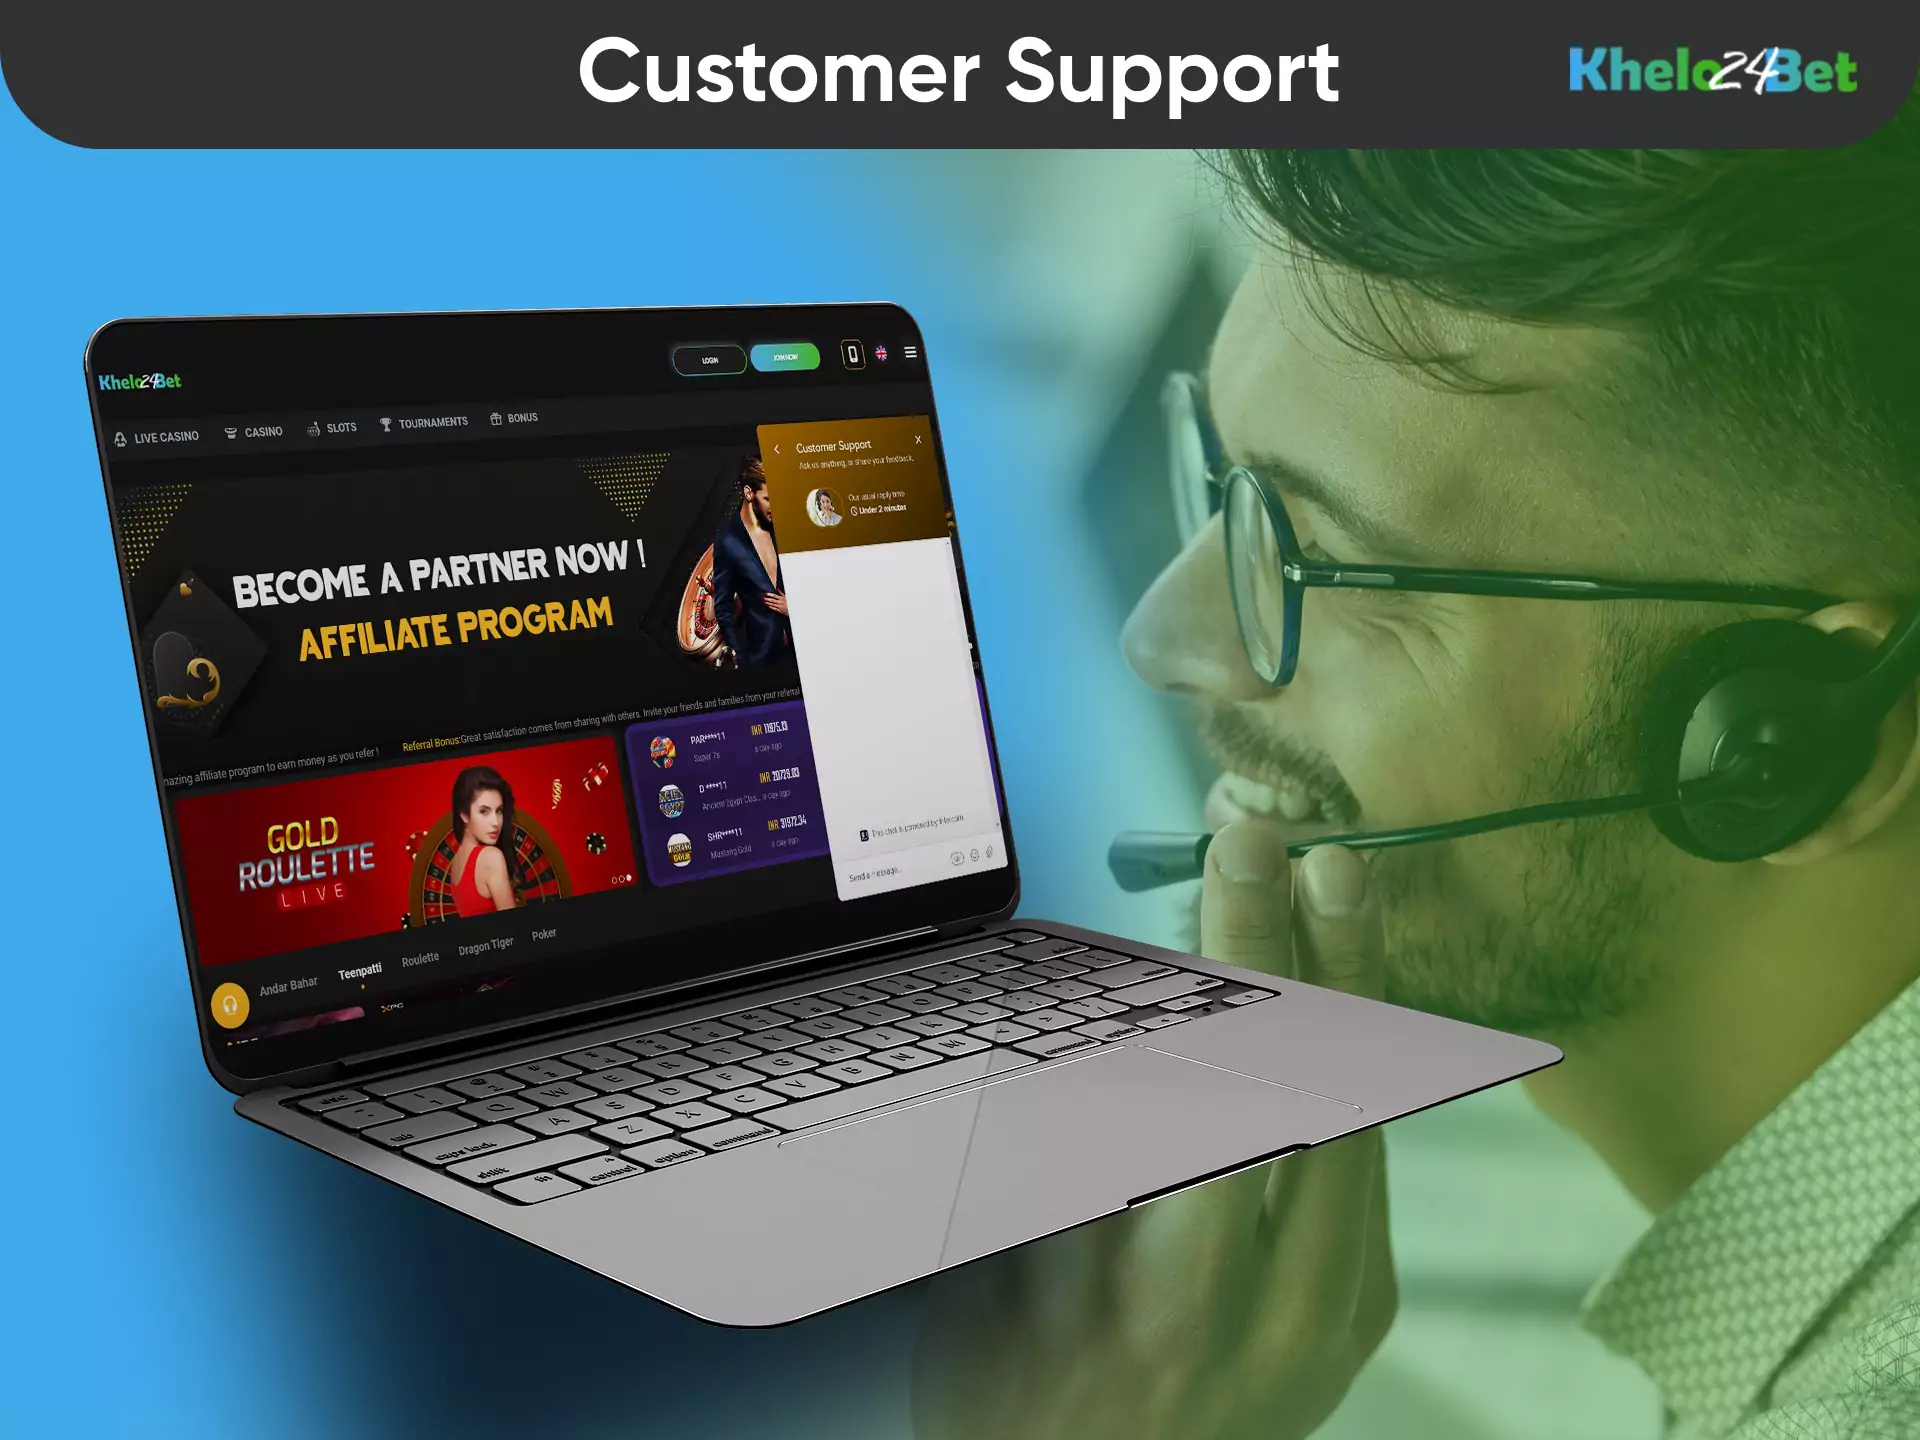 If you have questions about betting or gambling on Khelo24bet, ask customer support anytime.